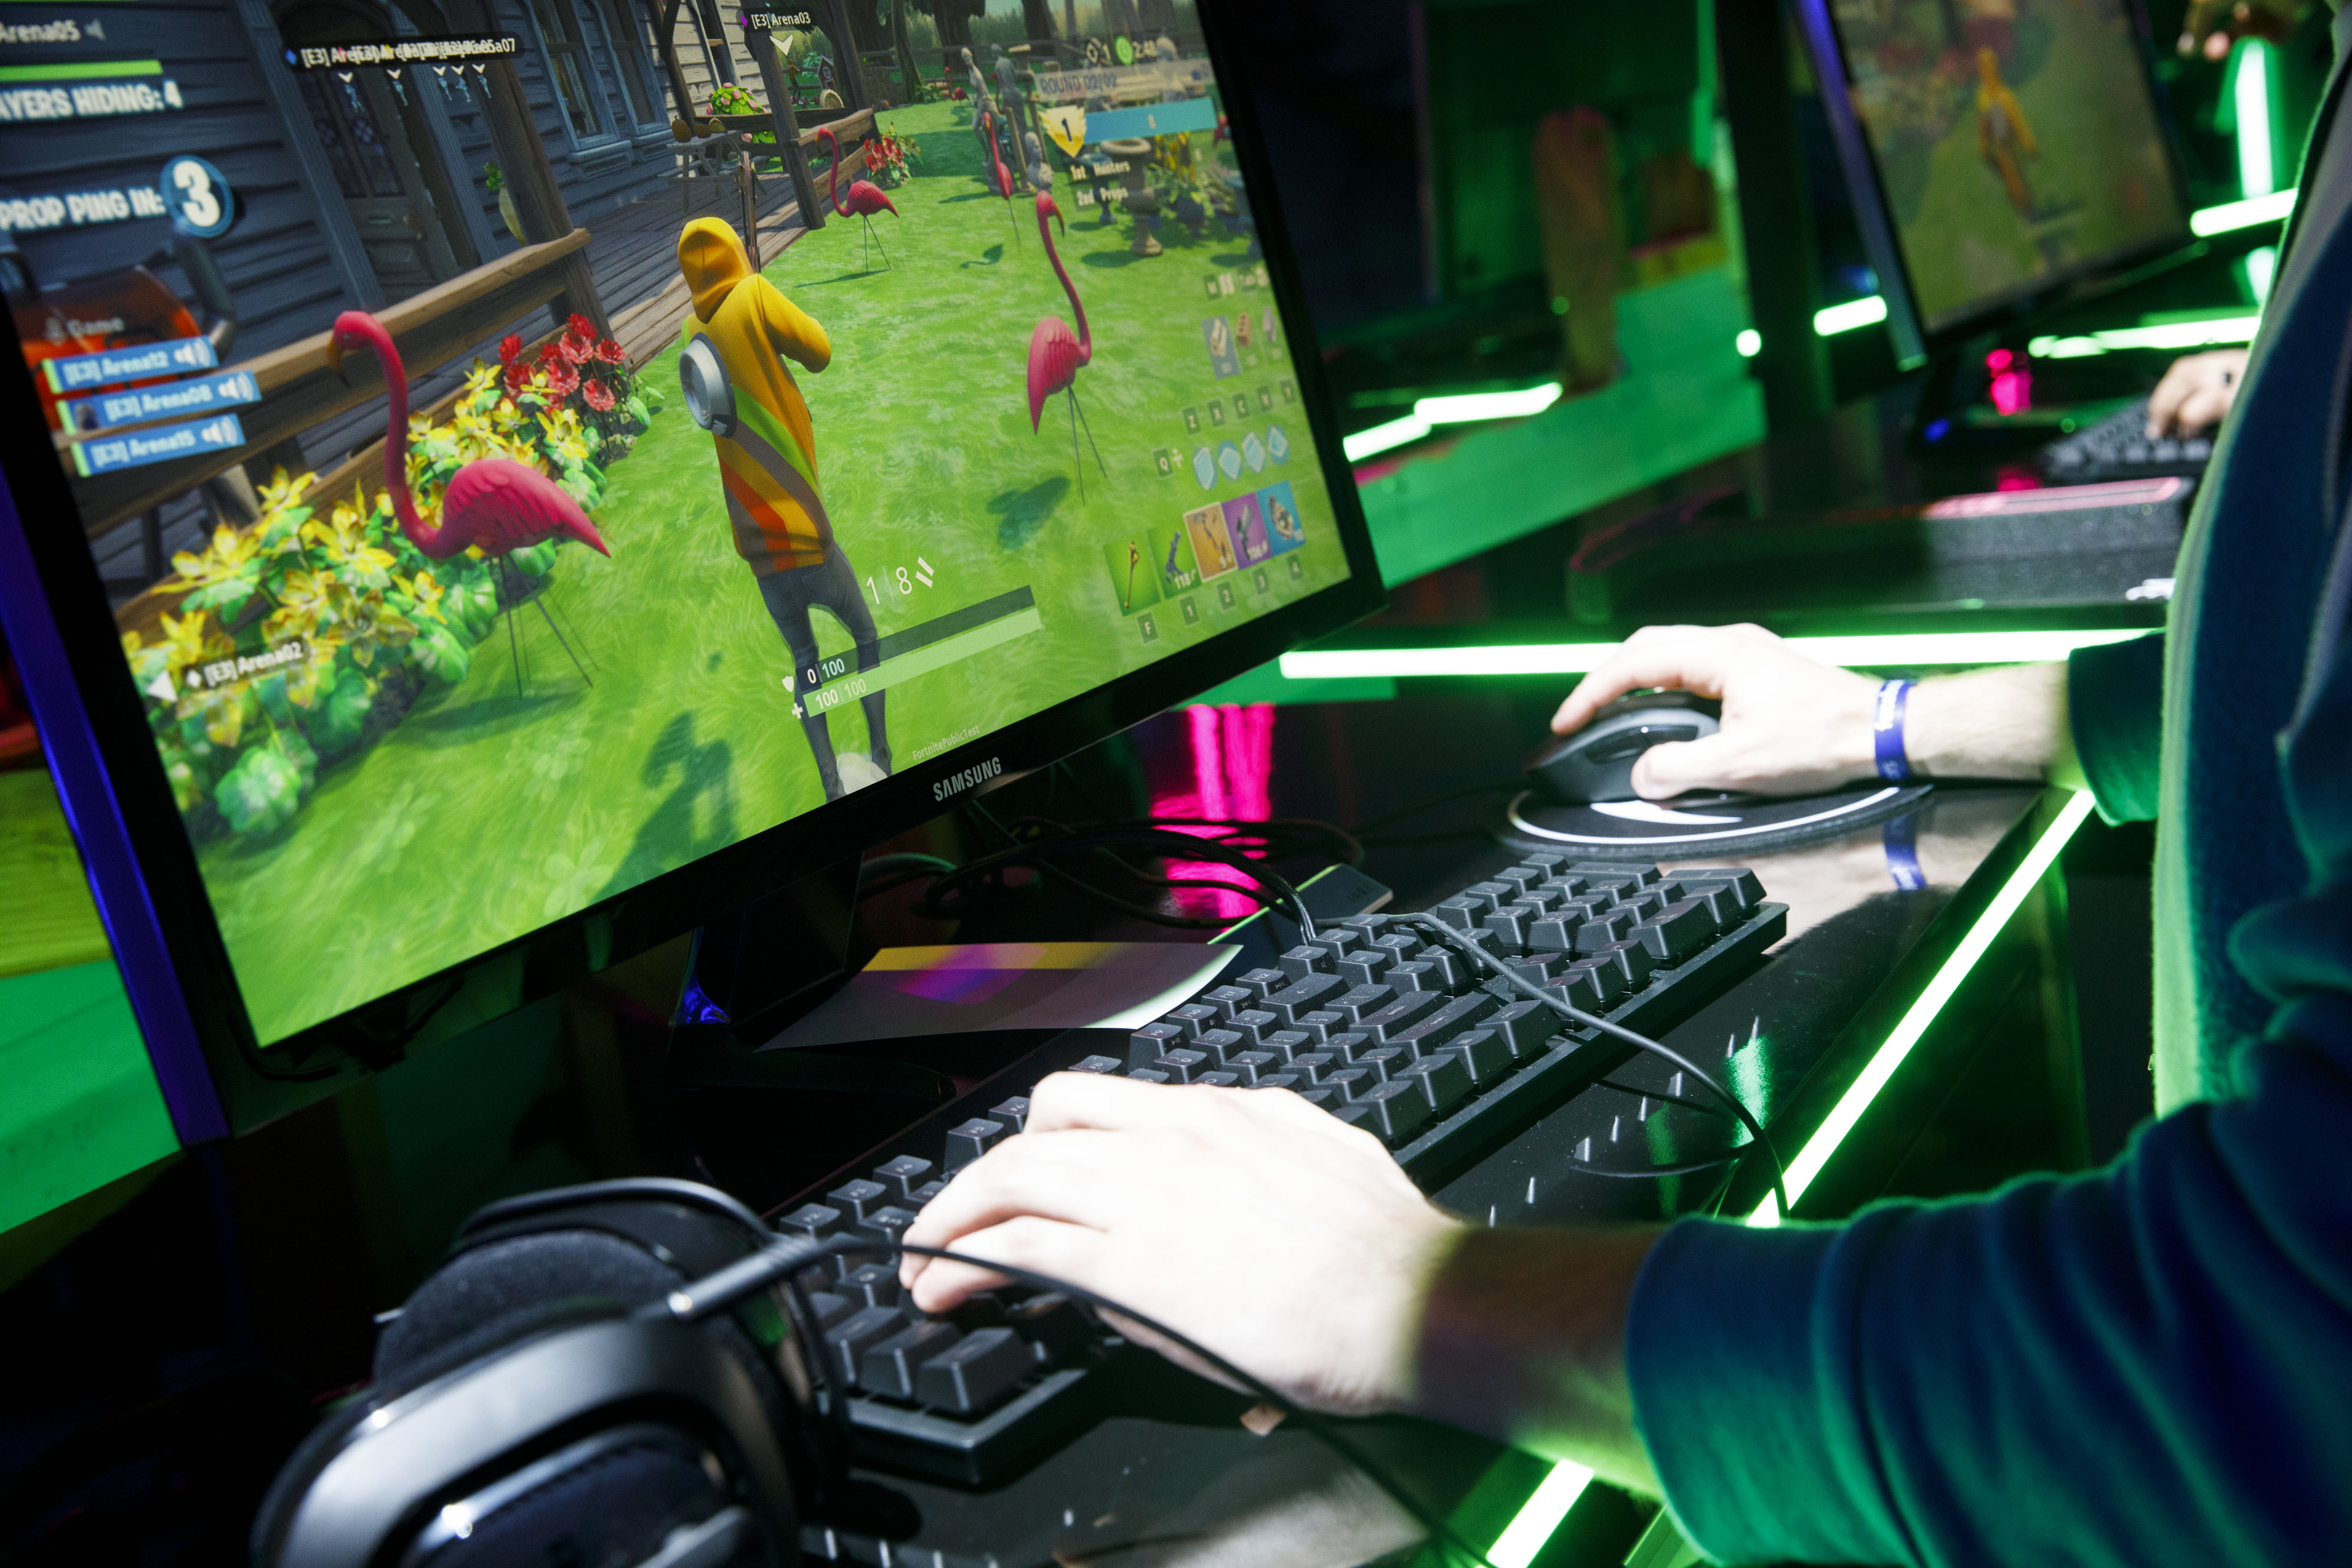 An attendee plays the Epic Games Inc. Fortnite video game during the E3 Electronic Entertainment Expo in Los Angeles, California.